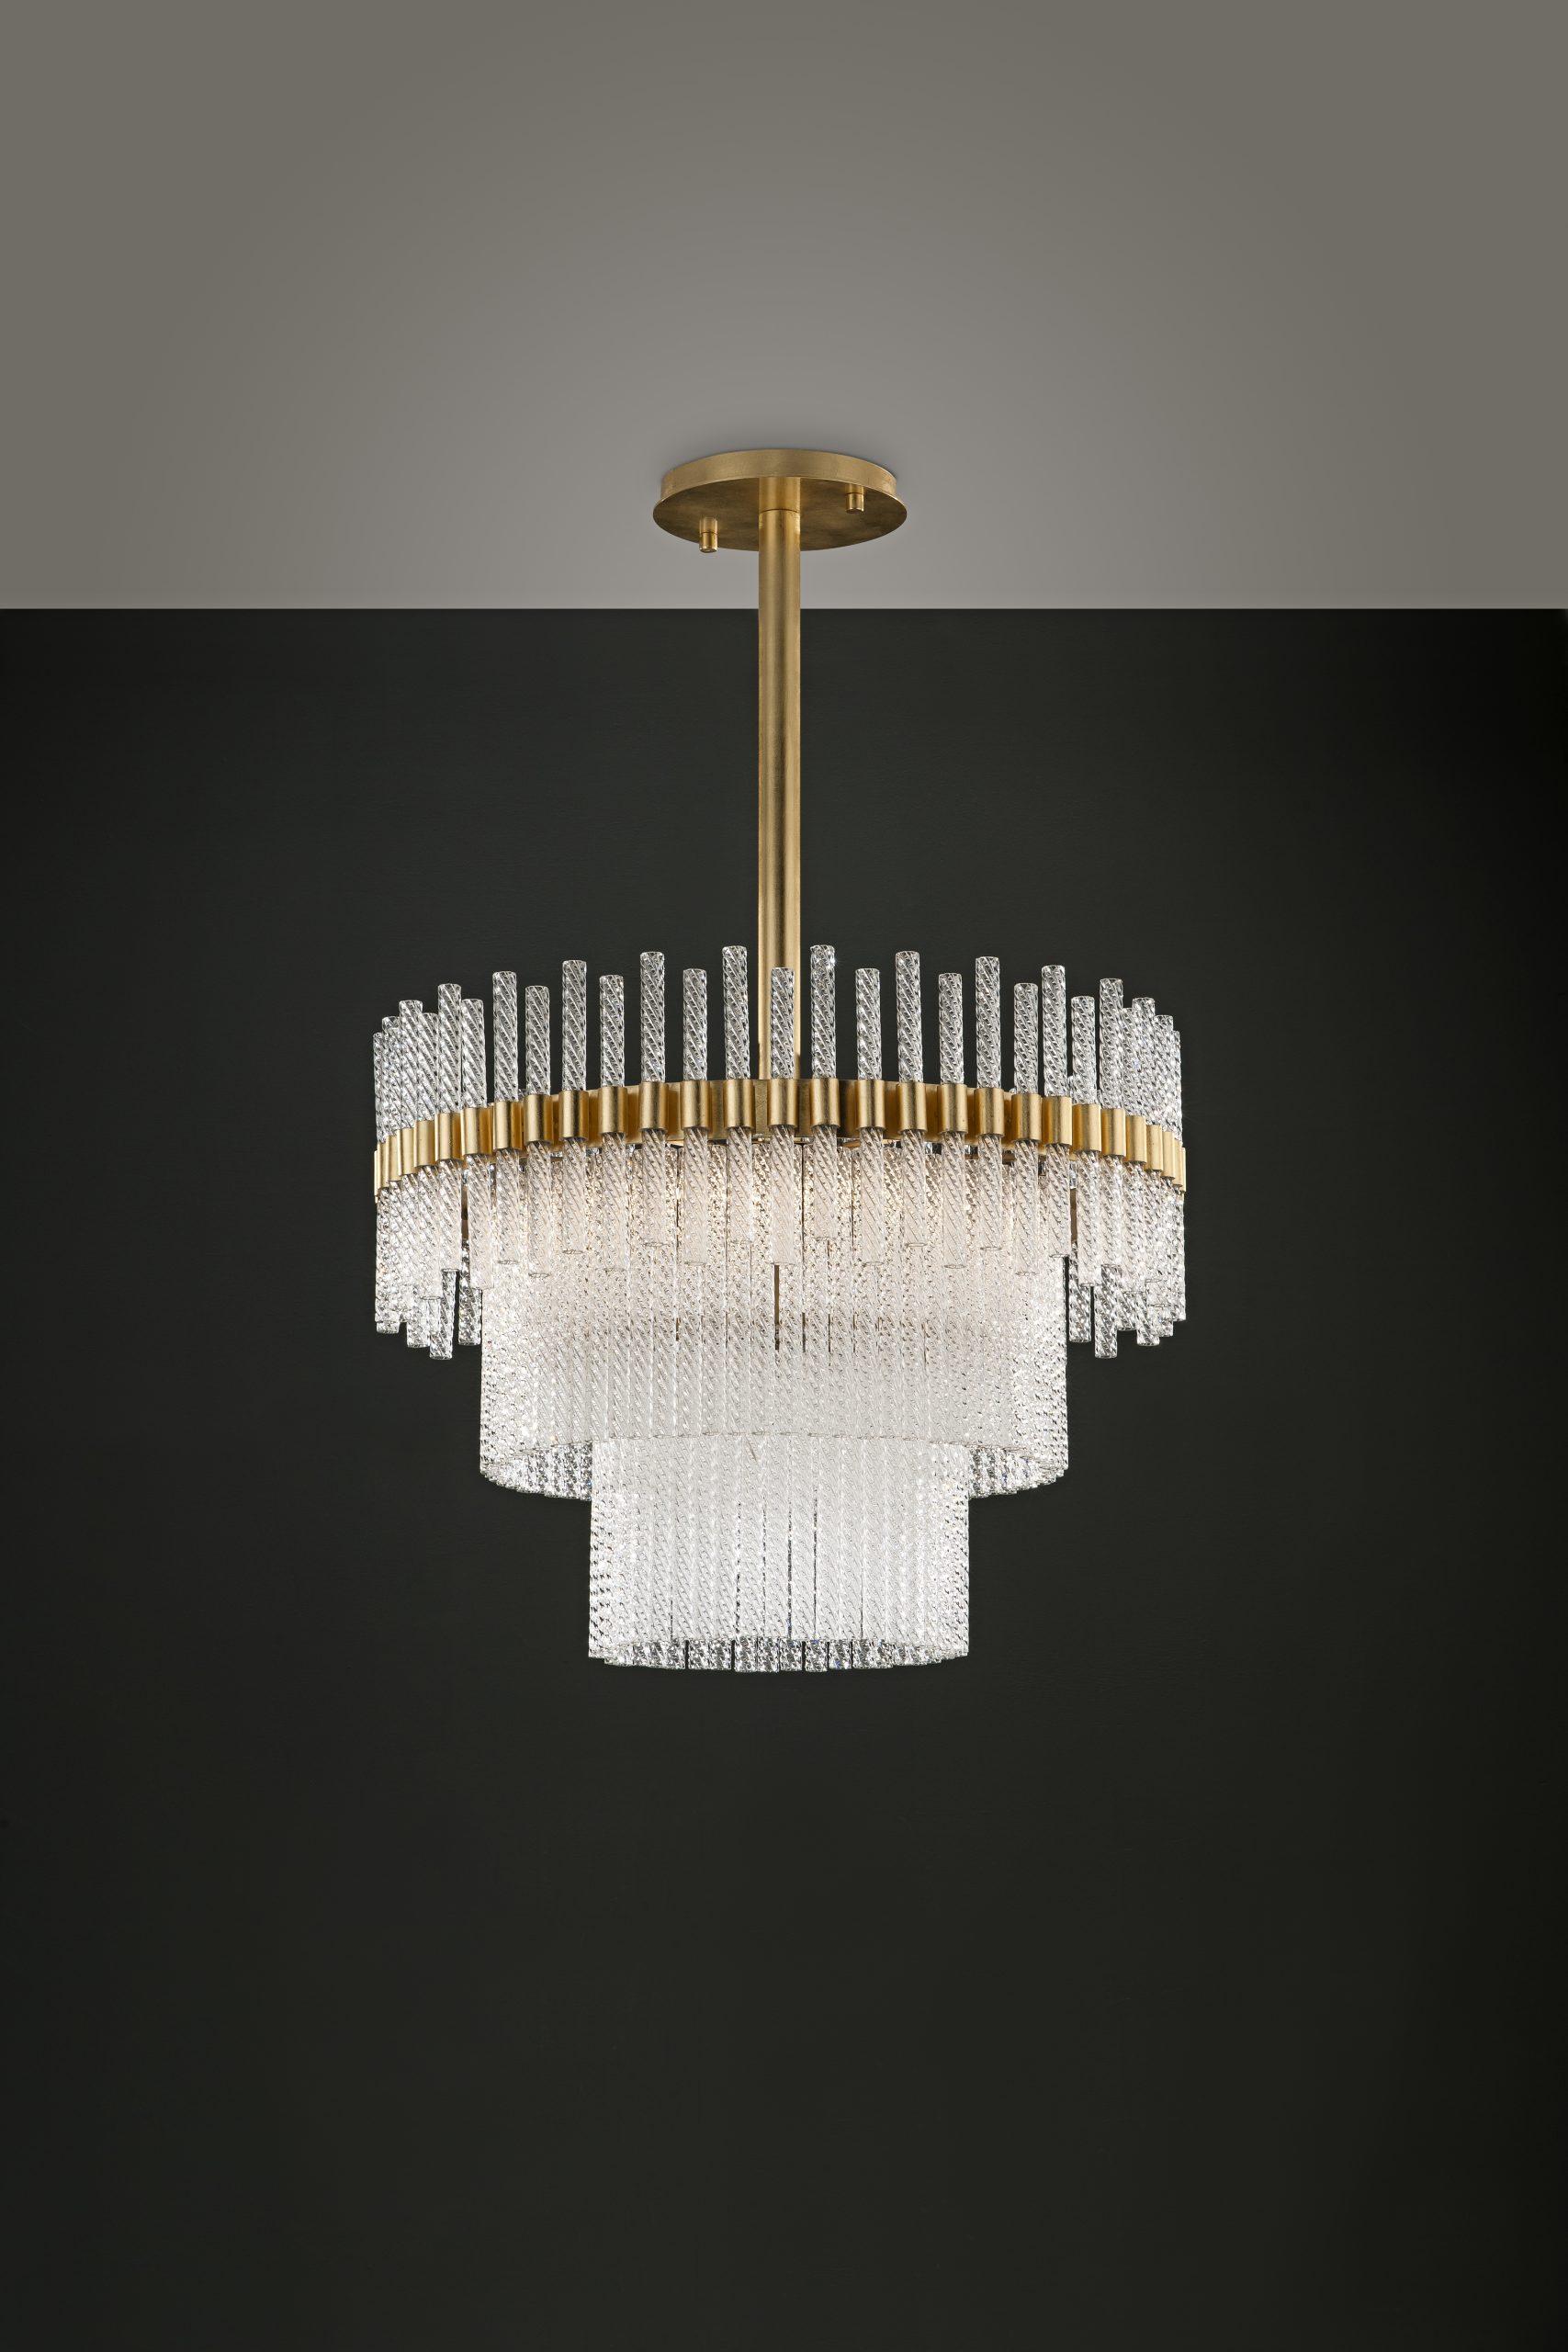 Glass Chandelier by Aver
Dimensions: D 72 x H 65 cm
Materials: Glass, metals.
Finishes: Gold Leaf, Silver Leaf, Warm Gold Leaf, Warm Silver Leaf, Warm Copper Leaf, Dark Gold Leaf, Dark Silver Leaf, Bronze Leaf, Antique Bronze, Antique